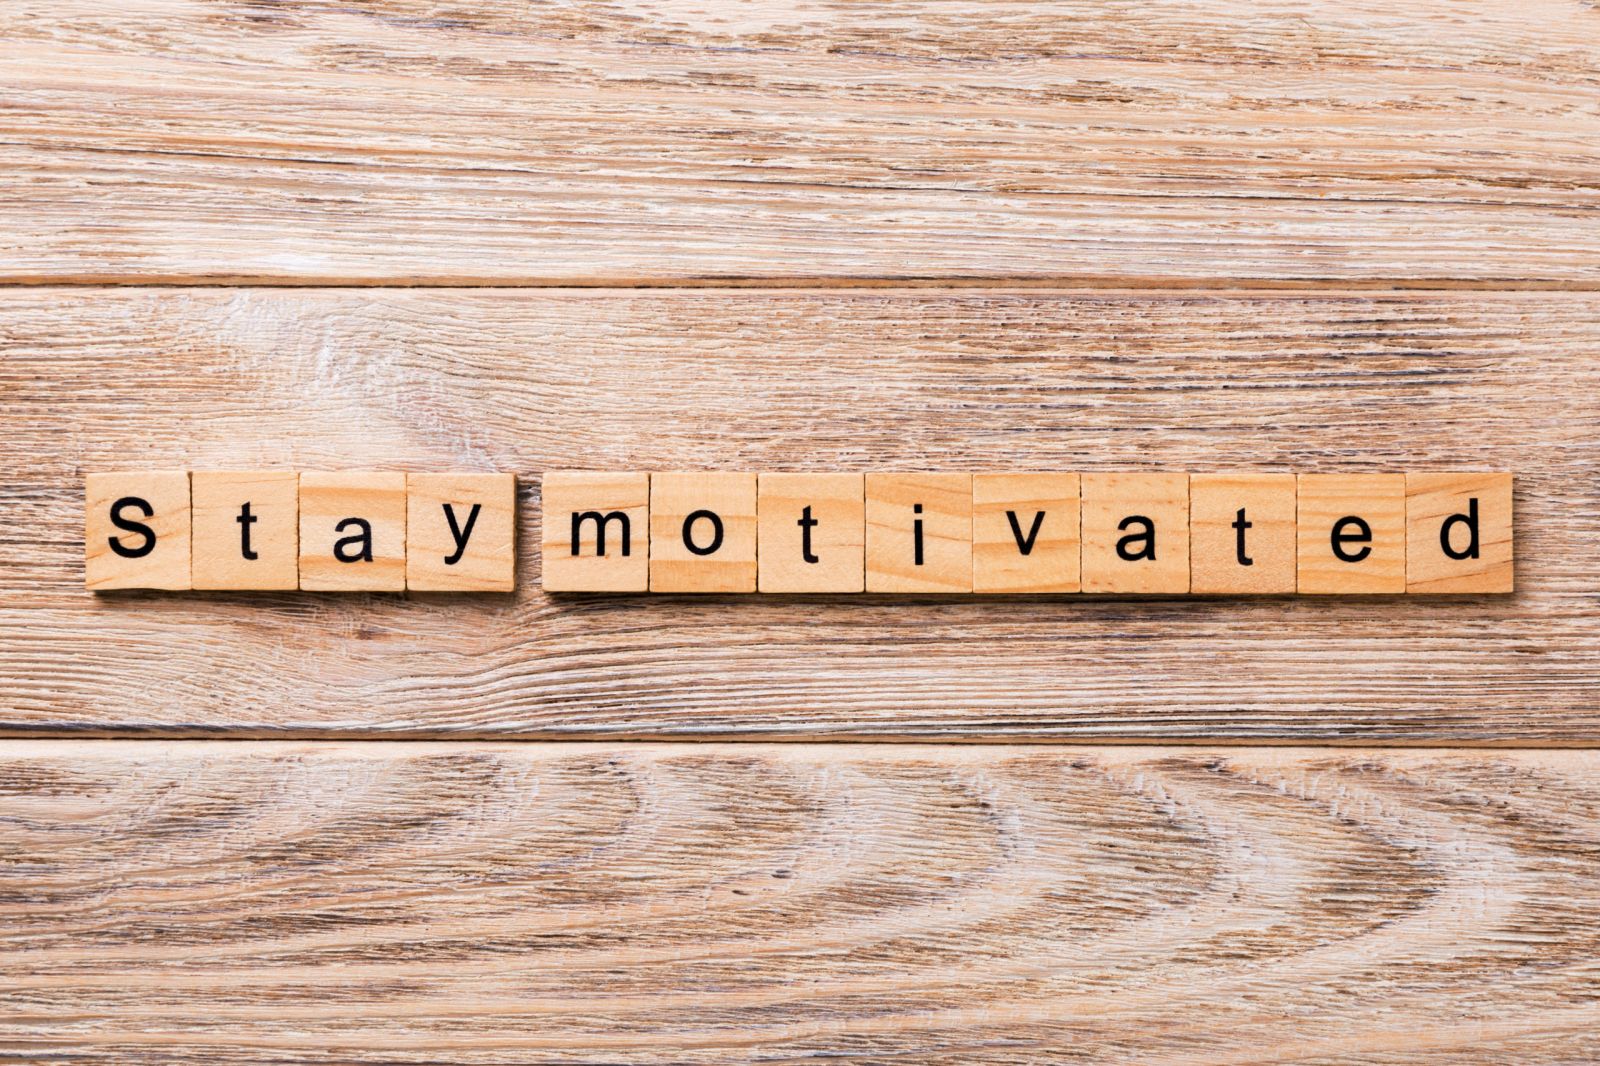 Top 5 Ways to Stay Motivated as A Remote Worker